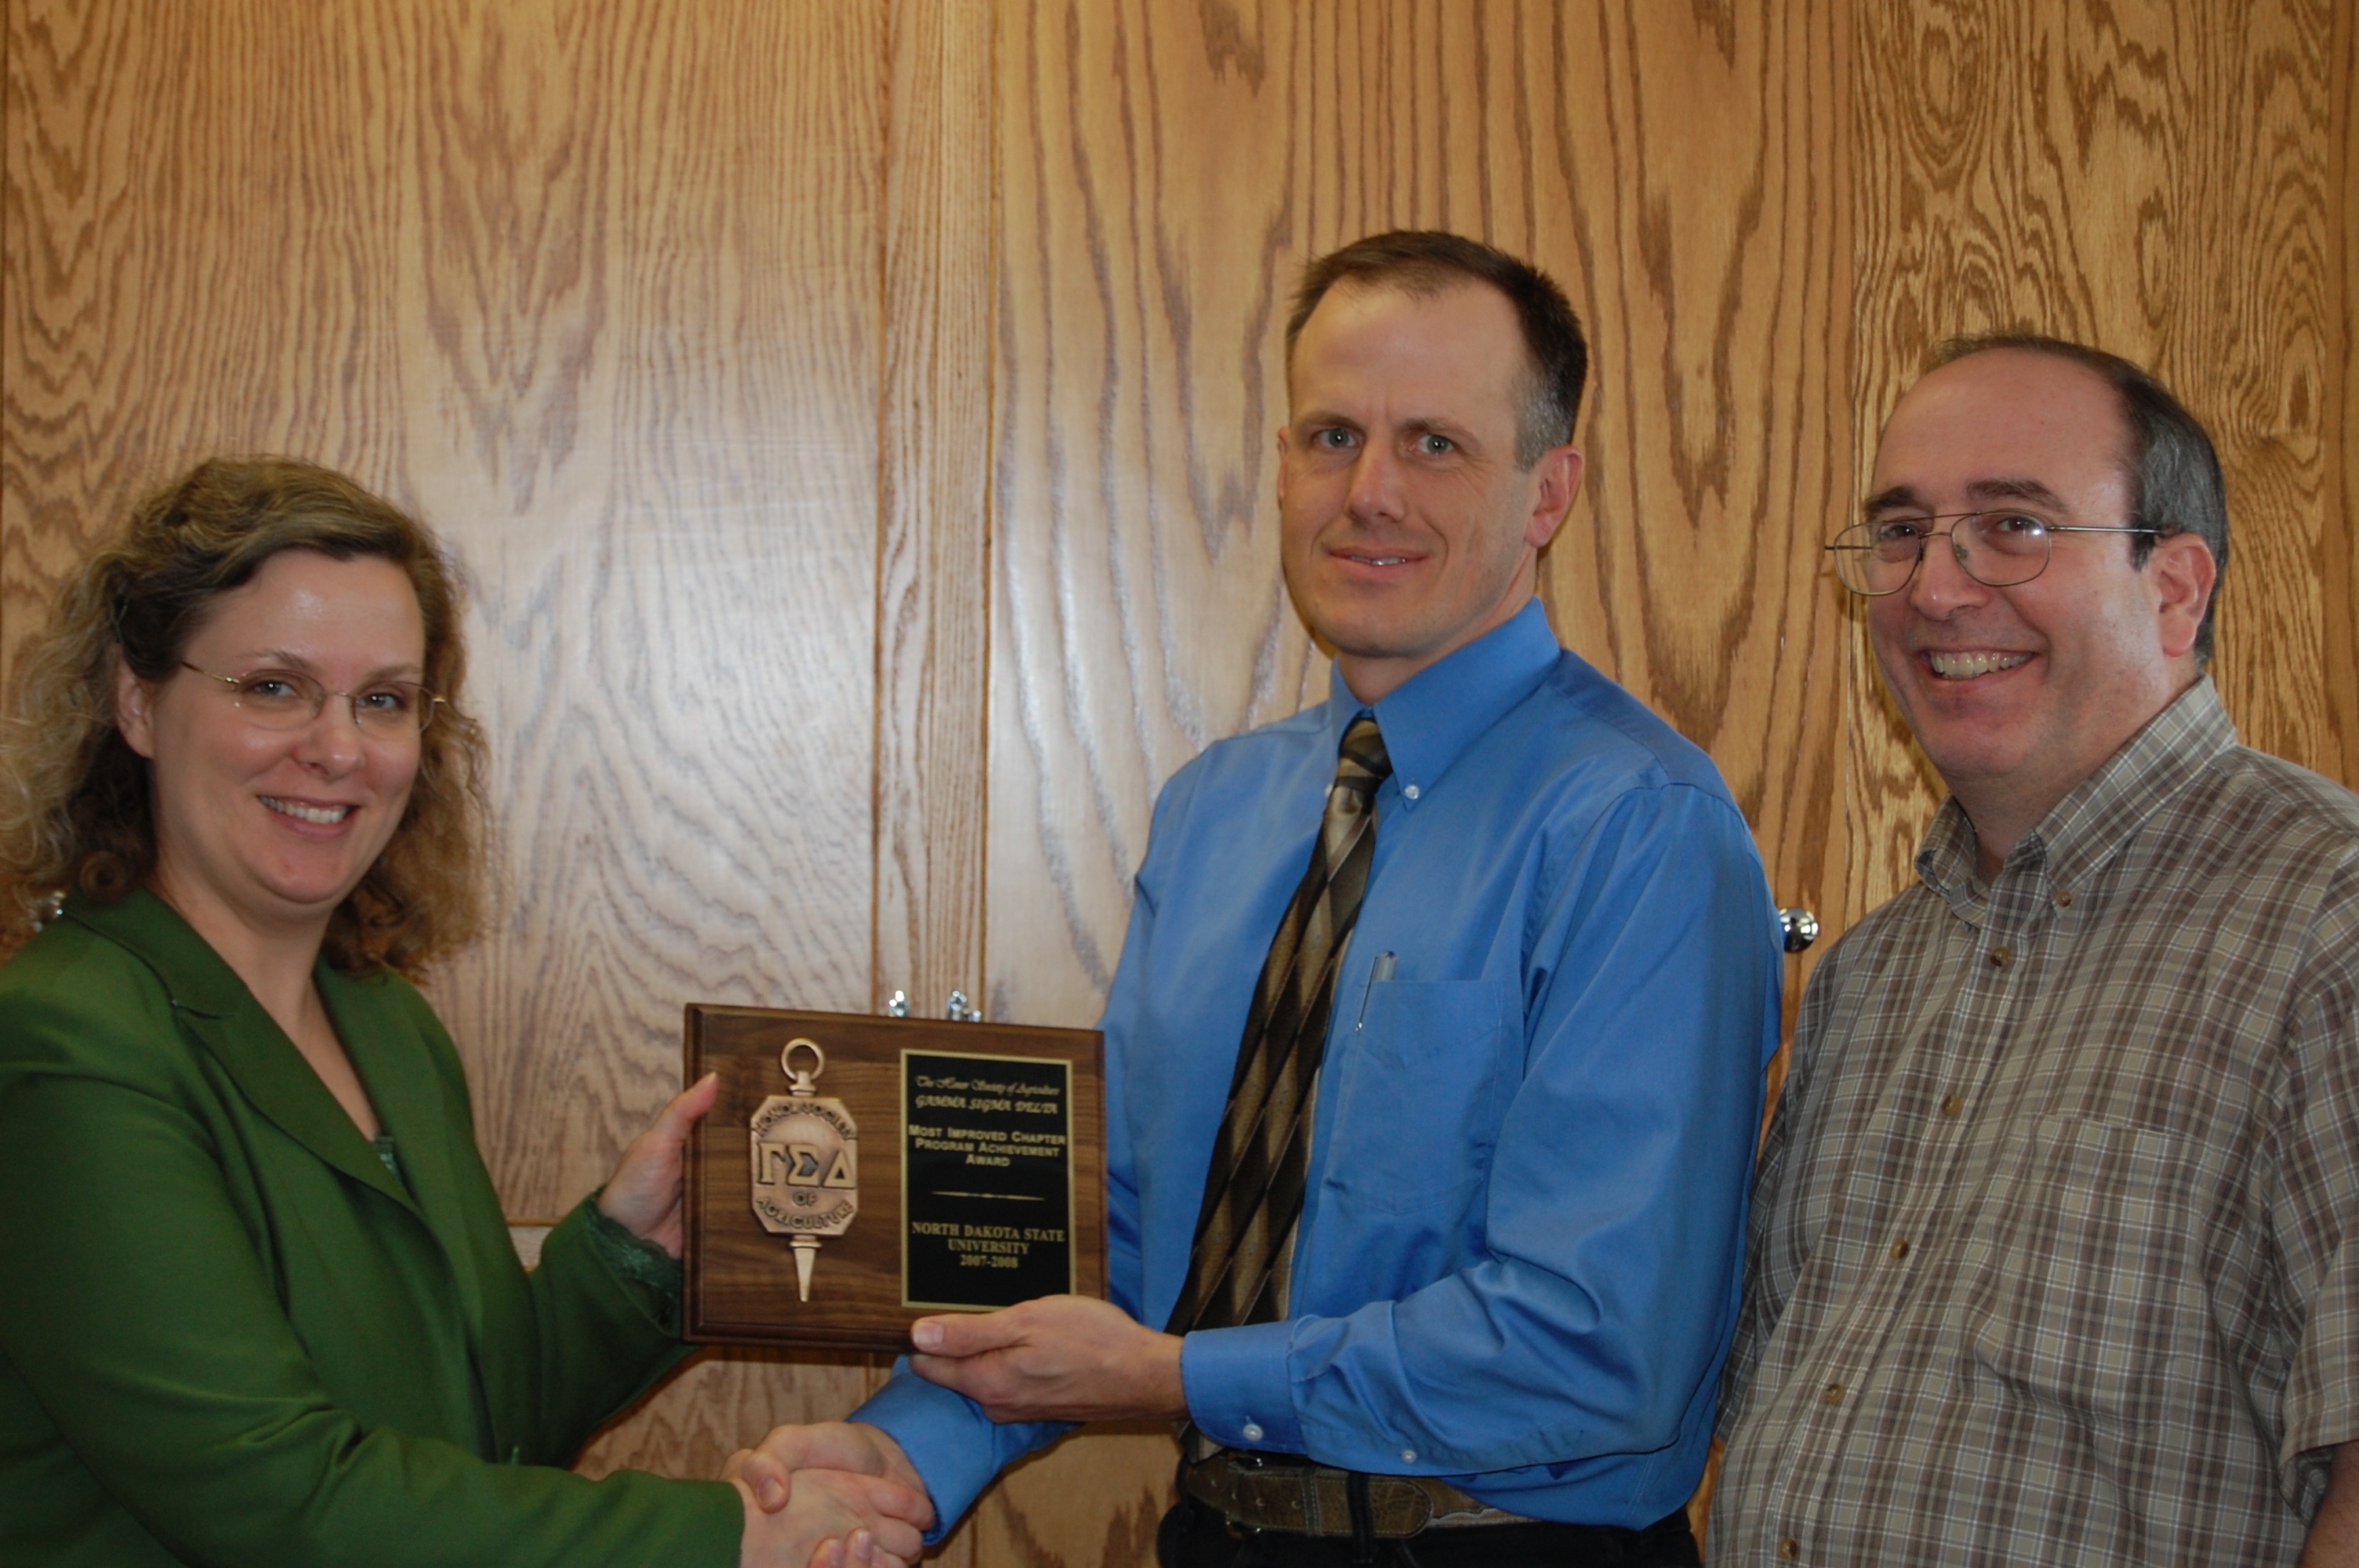 Charlene Wolf-Hall, an associate professor of food microbiology at NDSU and president-elect of Gamma Sigma Delta International, presents a plaque to Greg Lardy, (center) president of NDSU's Gamma Sigma Delta chapter, and Frank Manthey, past chapter president. NDSU's Gamma Sigma Delta was named the most improved chapter.